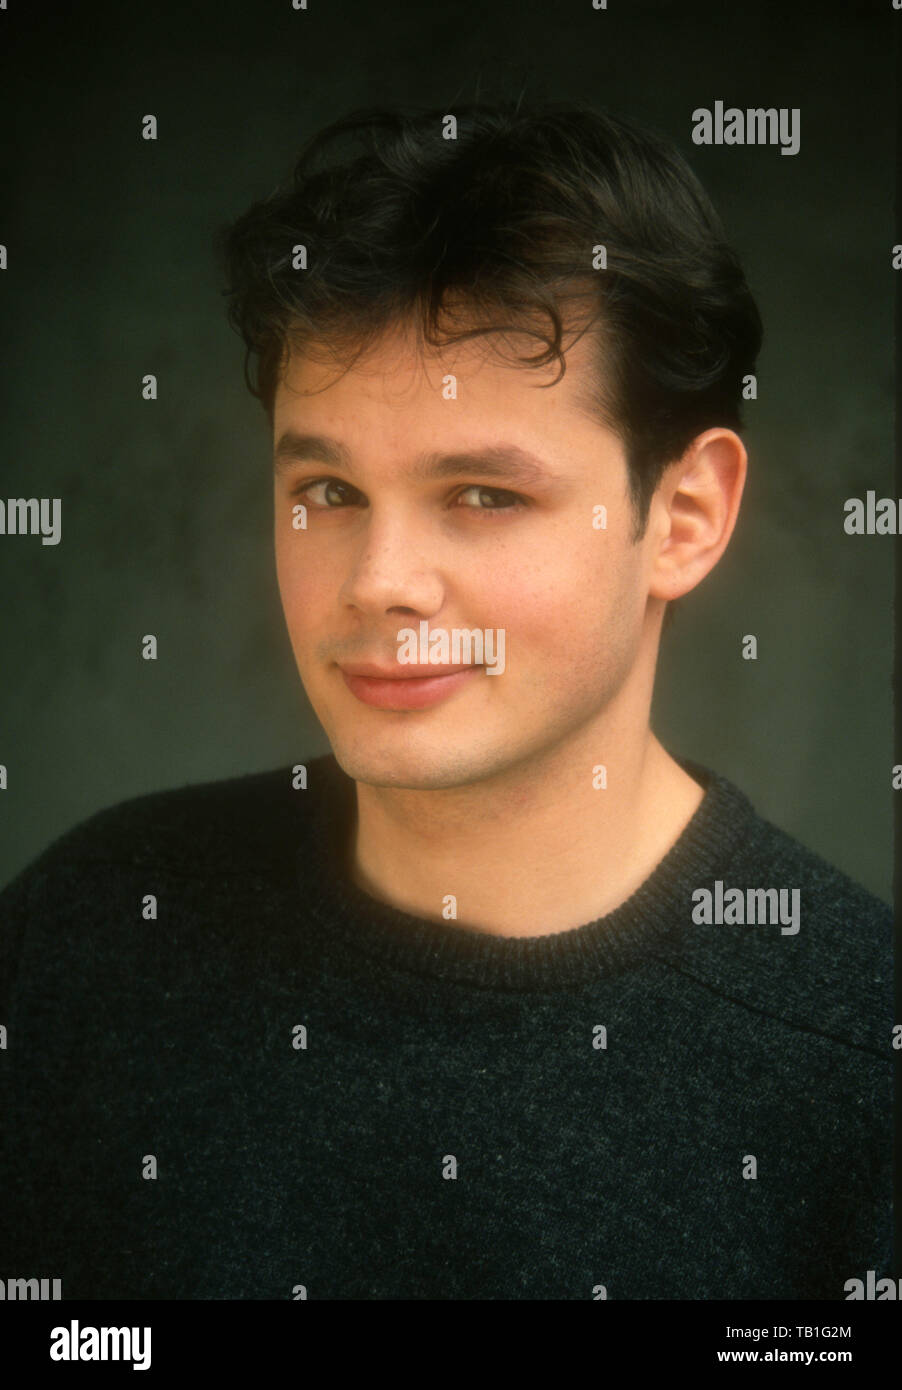 Los Angeles, California, USA 6th May 1994 (Exclusive) Actor Marco Hofschneider poses at a photo shoot on May 6, 1994 in Los Angeles, California, USA. Photo by Barry King/Alamy Stock Photo Stock Photo